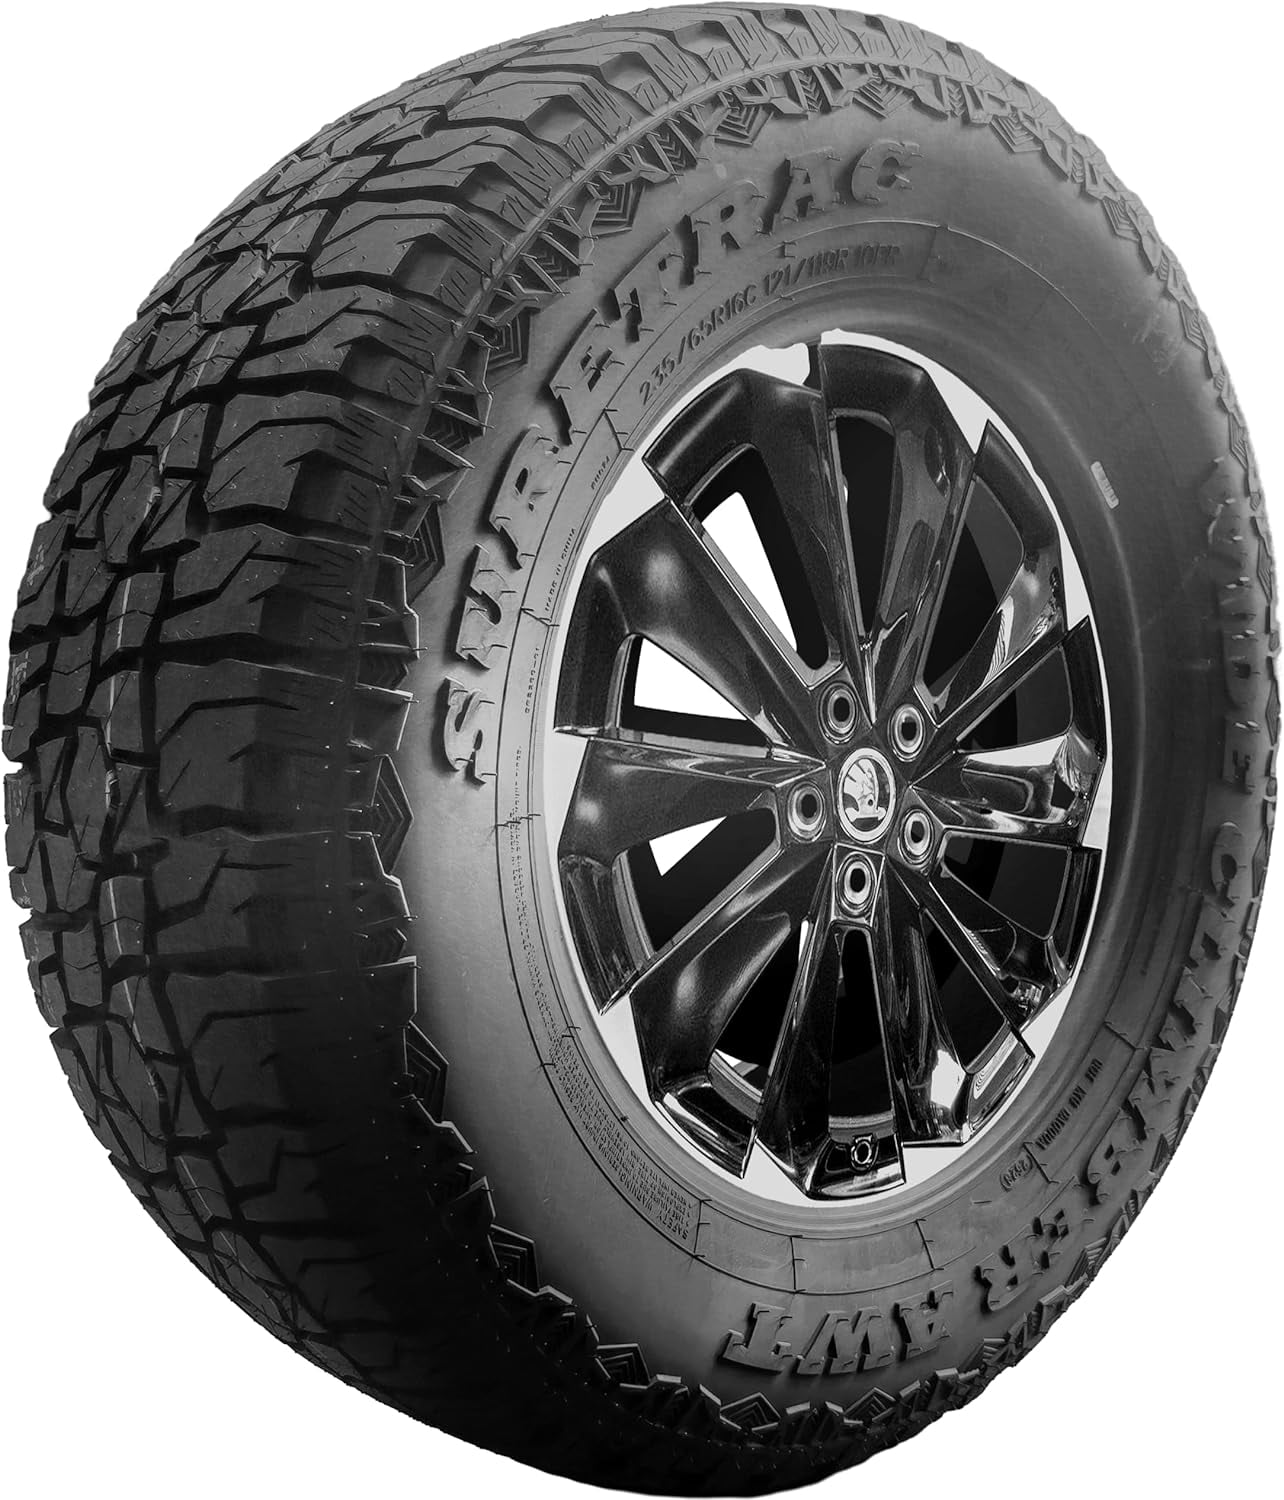 Suretrac Wide Climber Terrain road AWT 125Q Traction All tire All LT35X12.50R20 truck F/12 Weather off light OWL